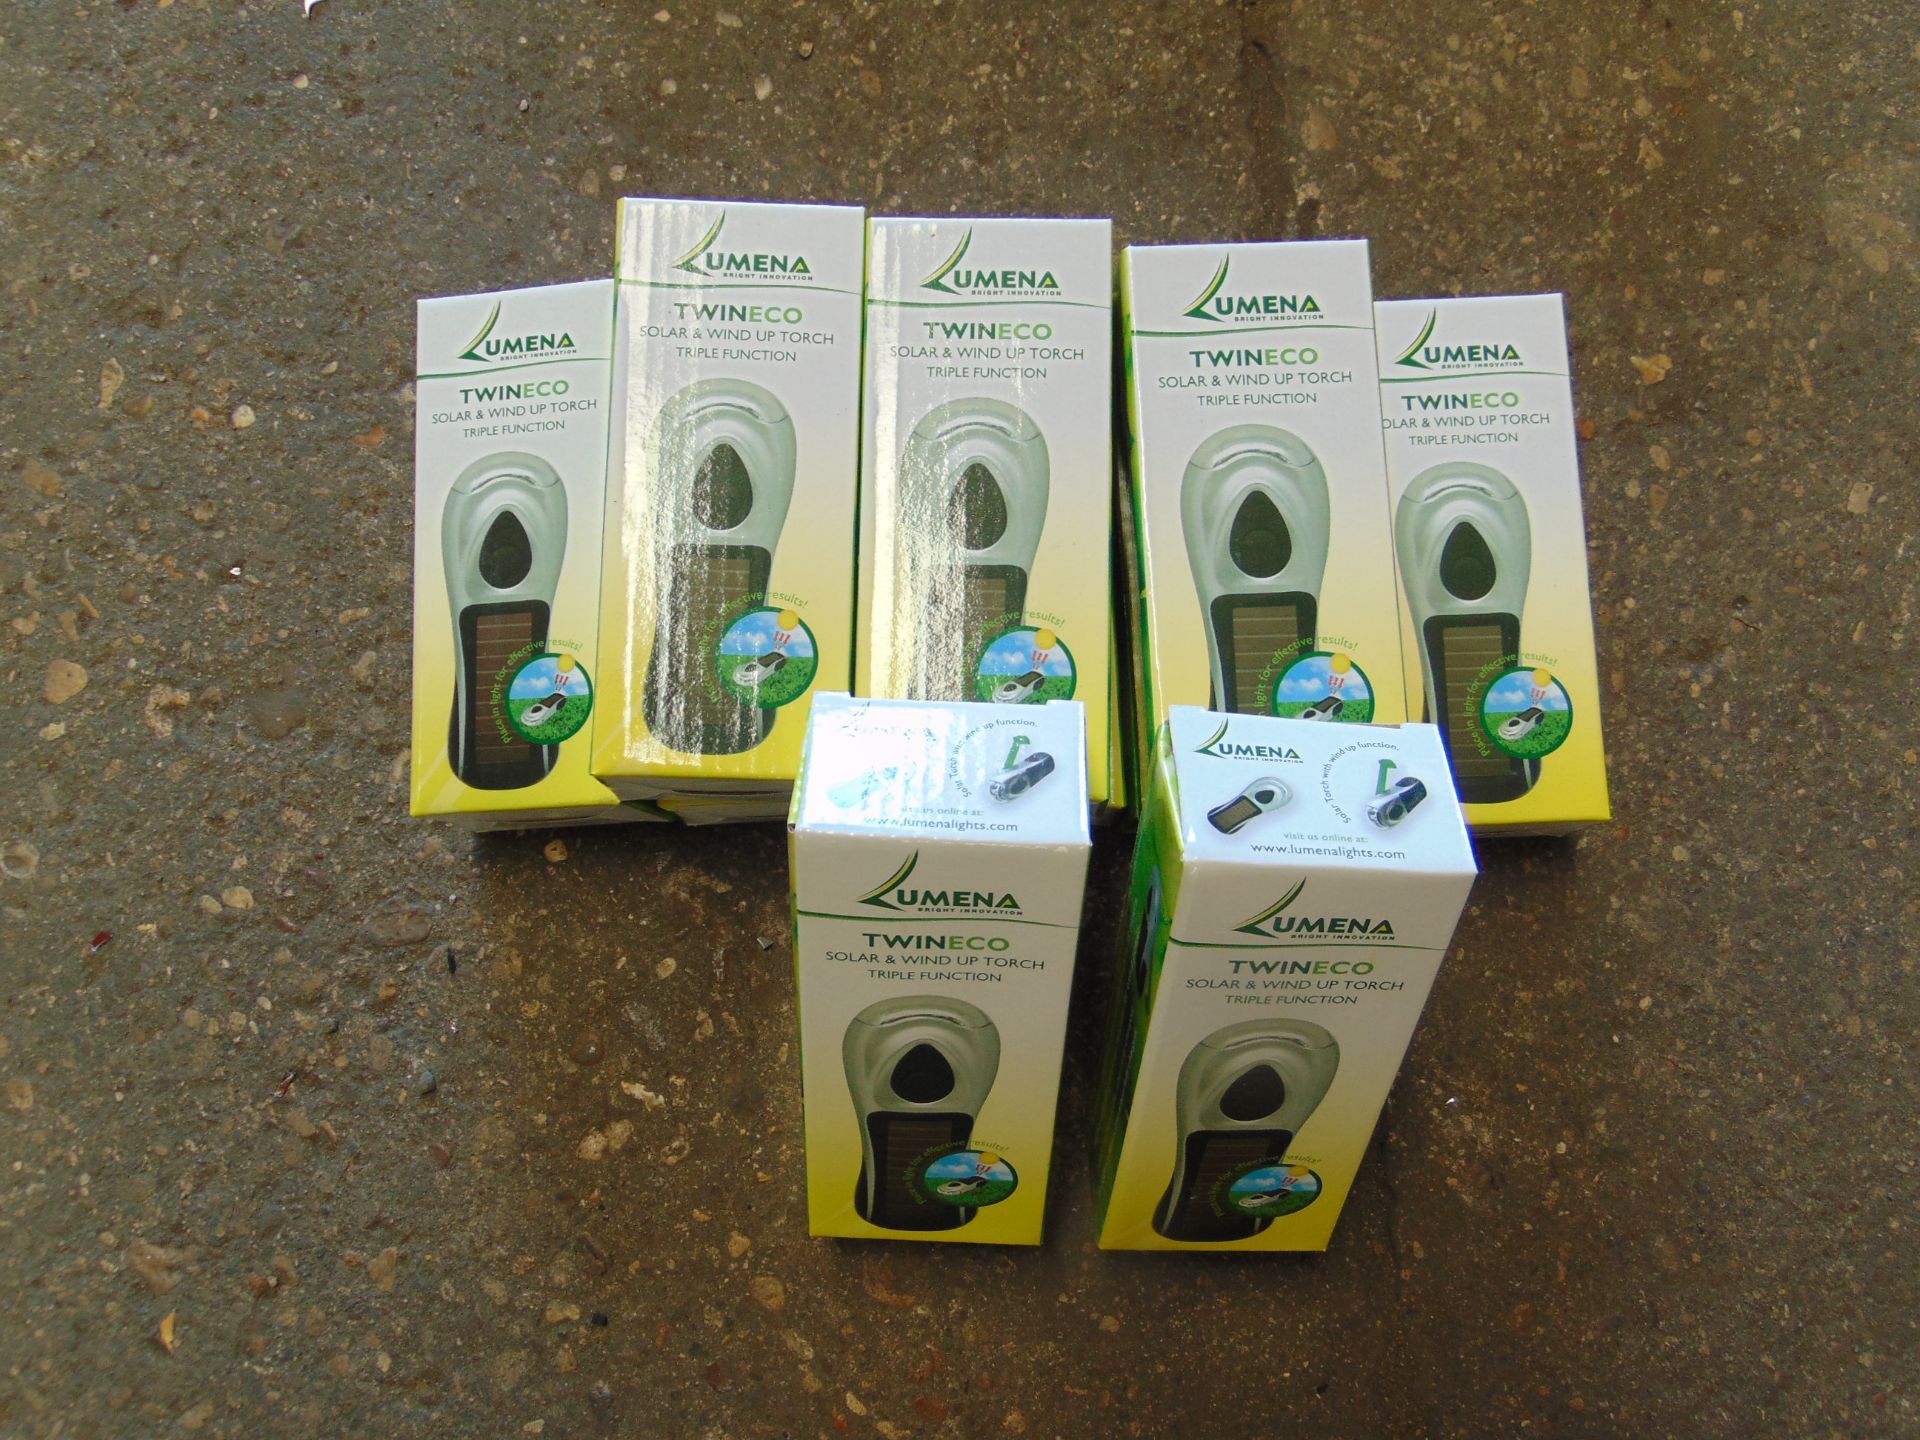 10X LUMENA TWINECO SOLAR AND WIND UP TRIPLE FUNCTION TORCH UNISSUED - Image 3 of 5